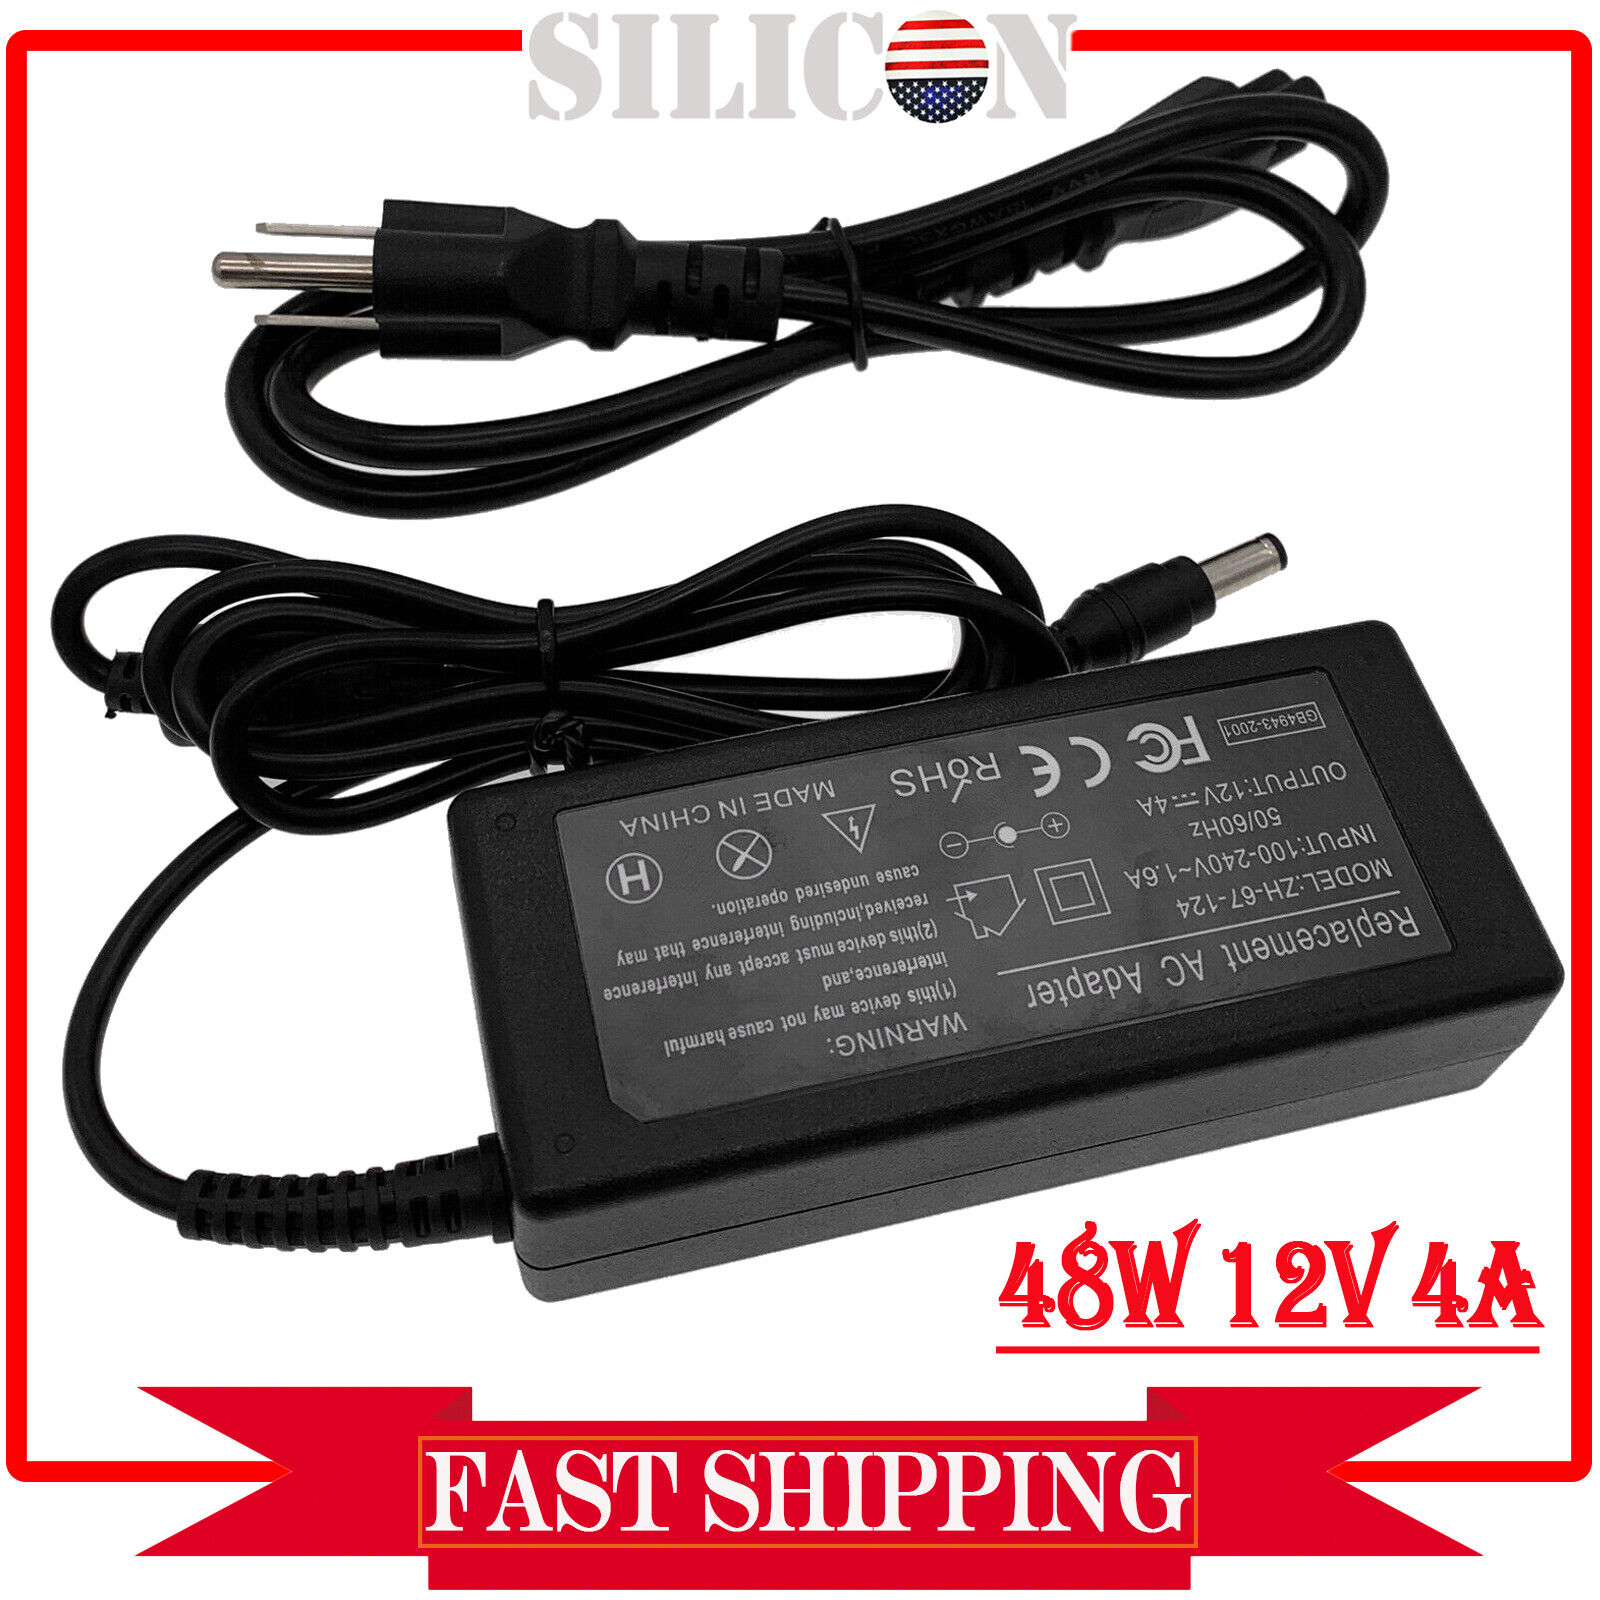 12V 4A AC Adapter Power Supply Charger For TASCAM DP-01FX/CD Porta Studio